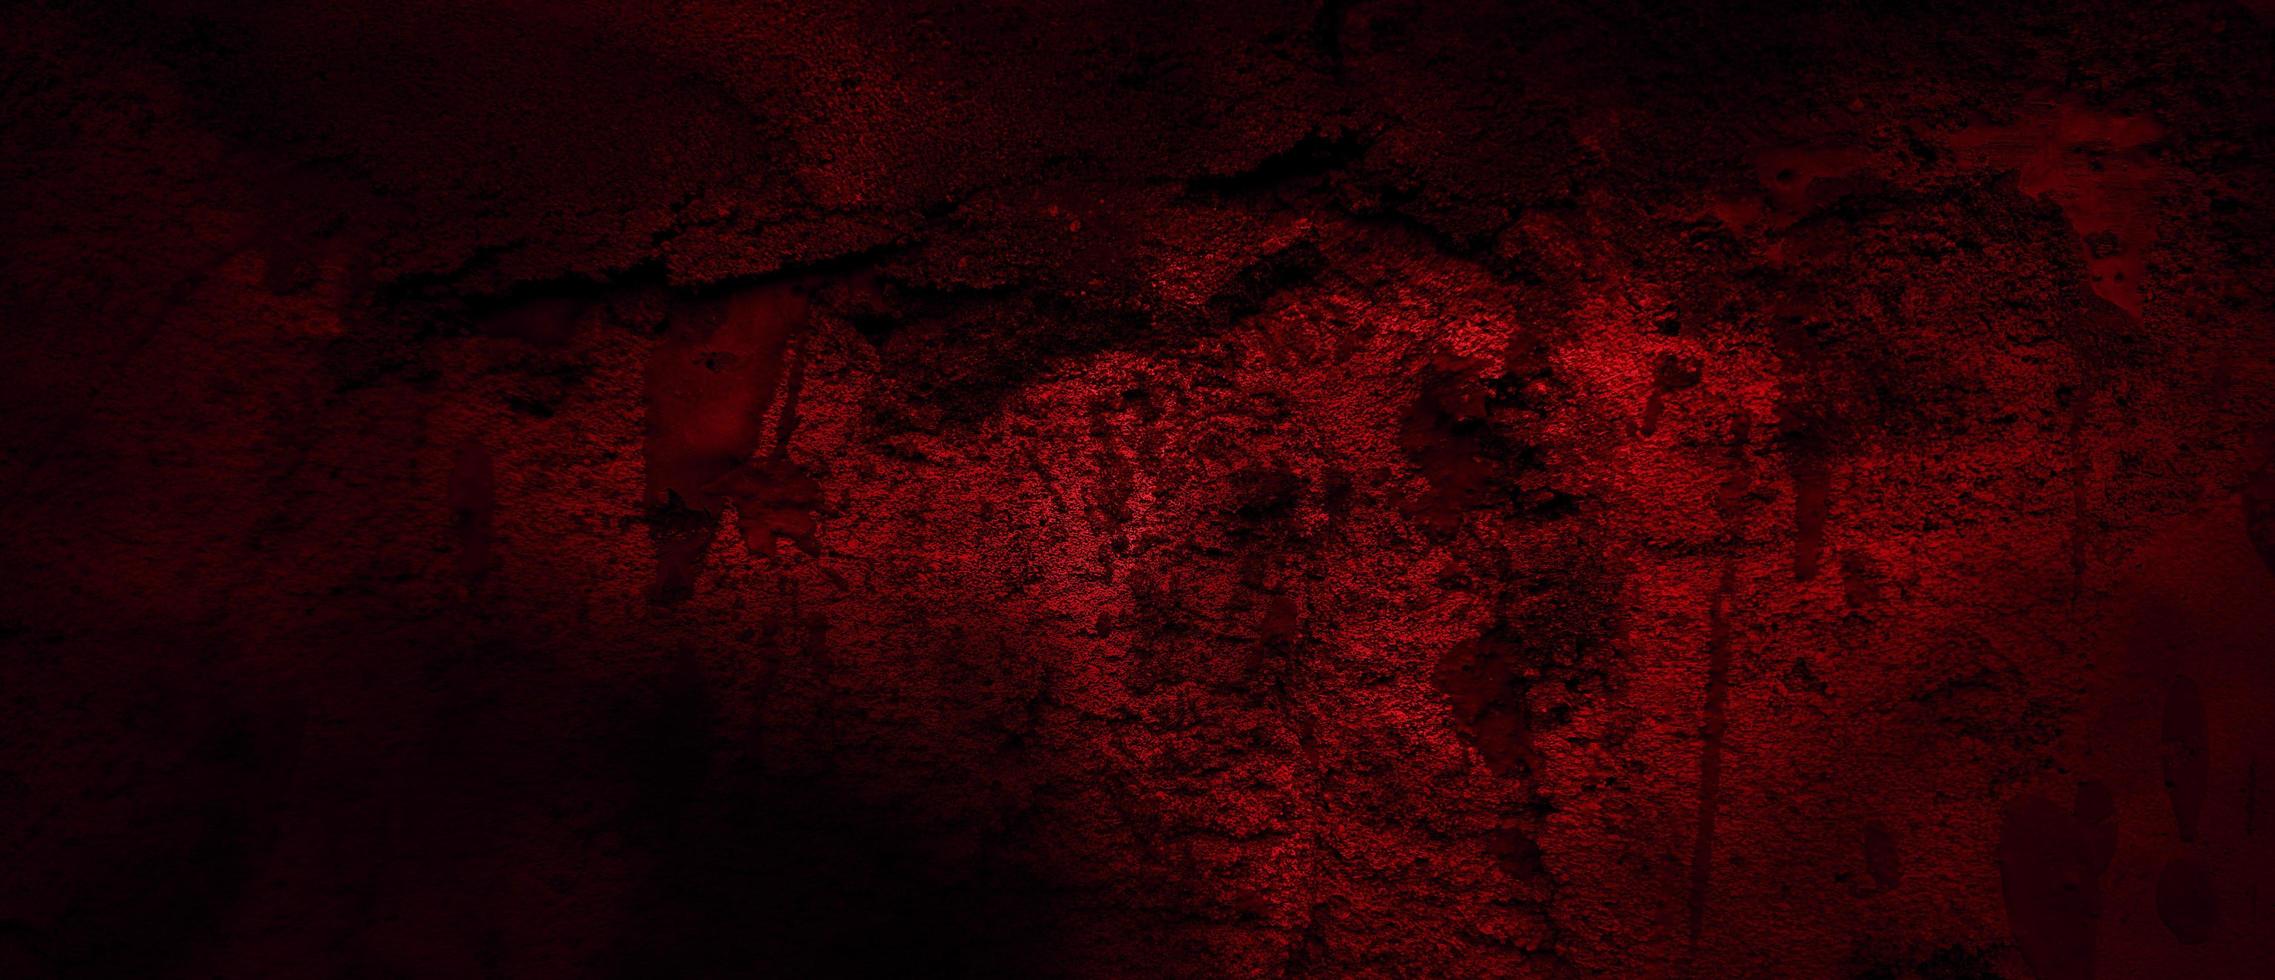 Scary Red and black horror background. Dark grunge red concrete photo